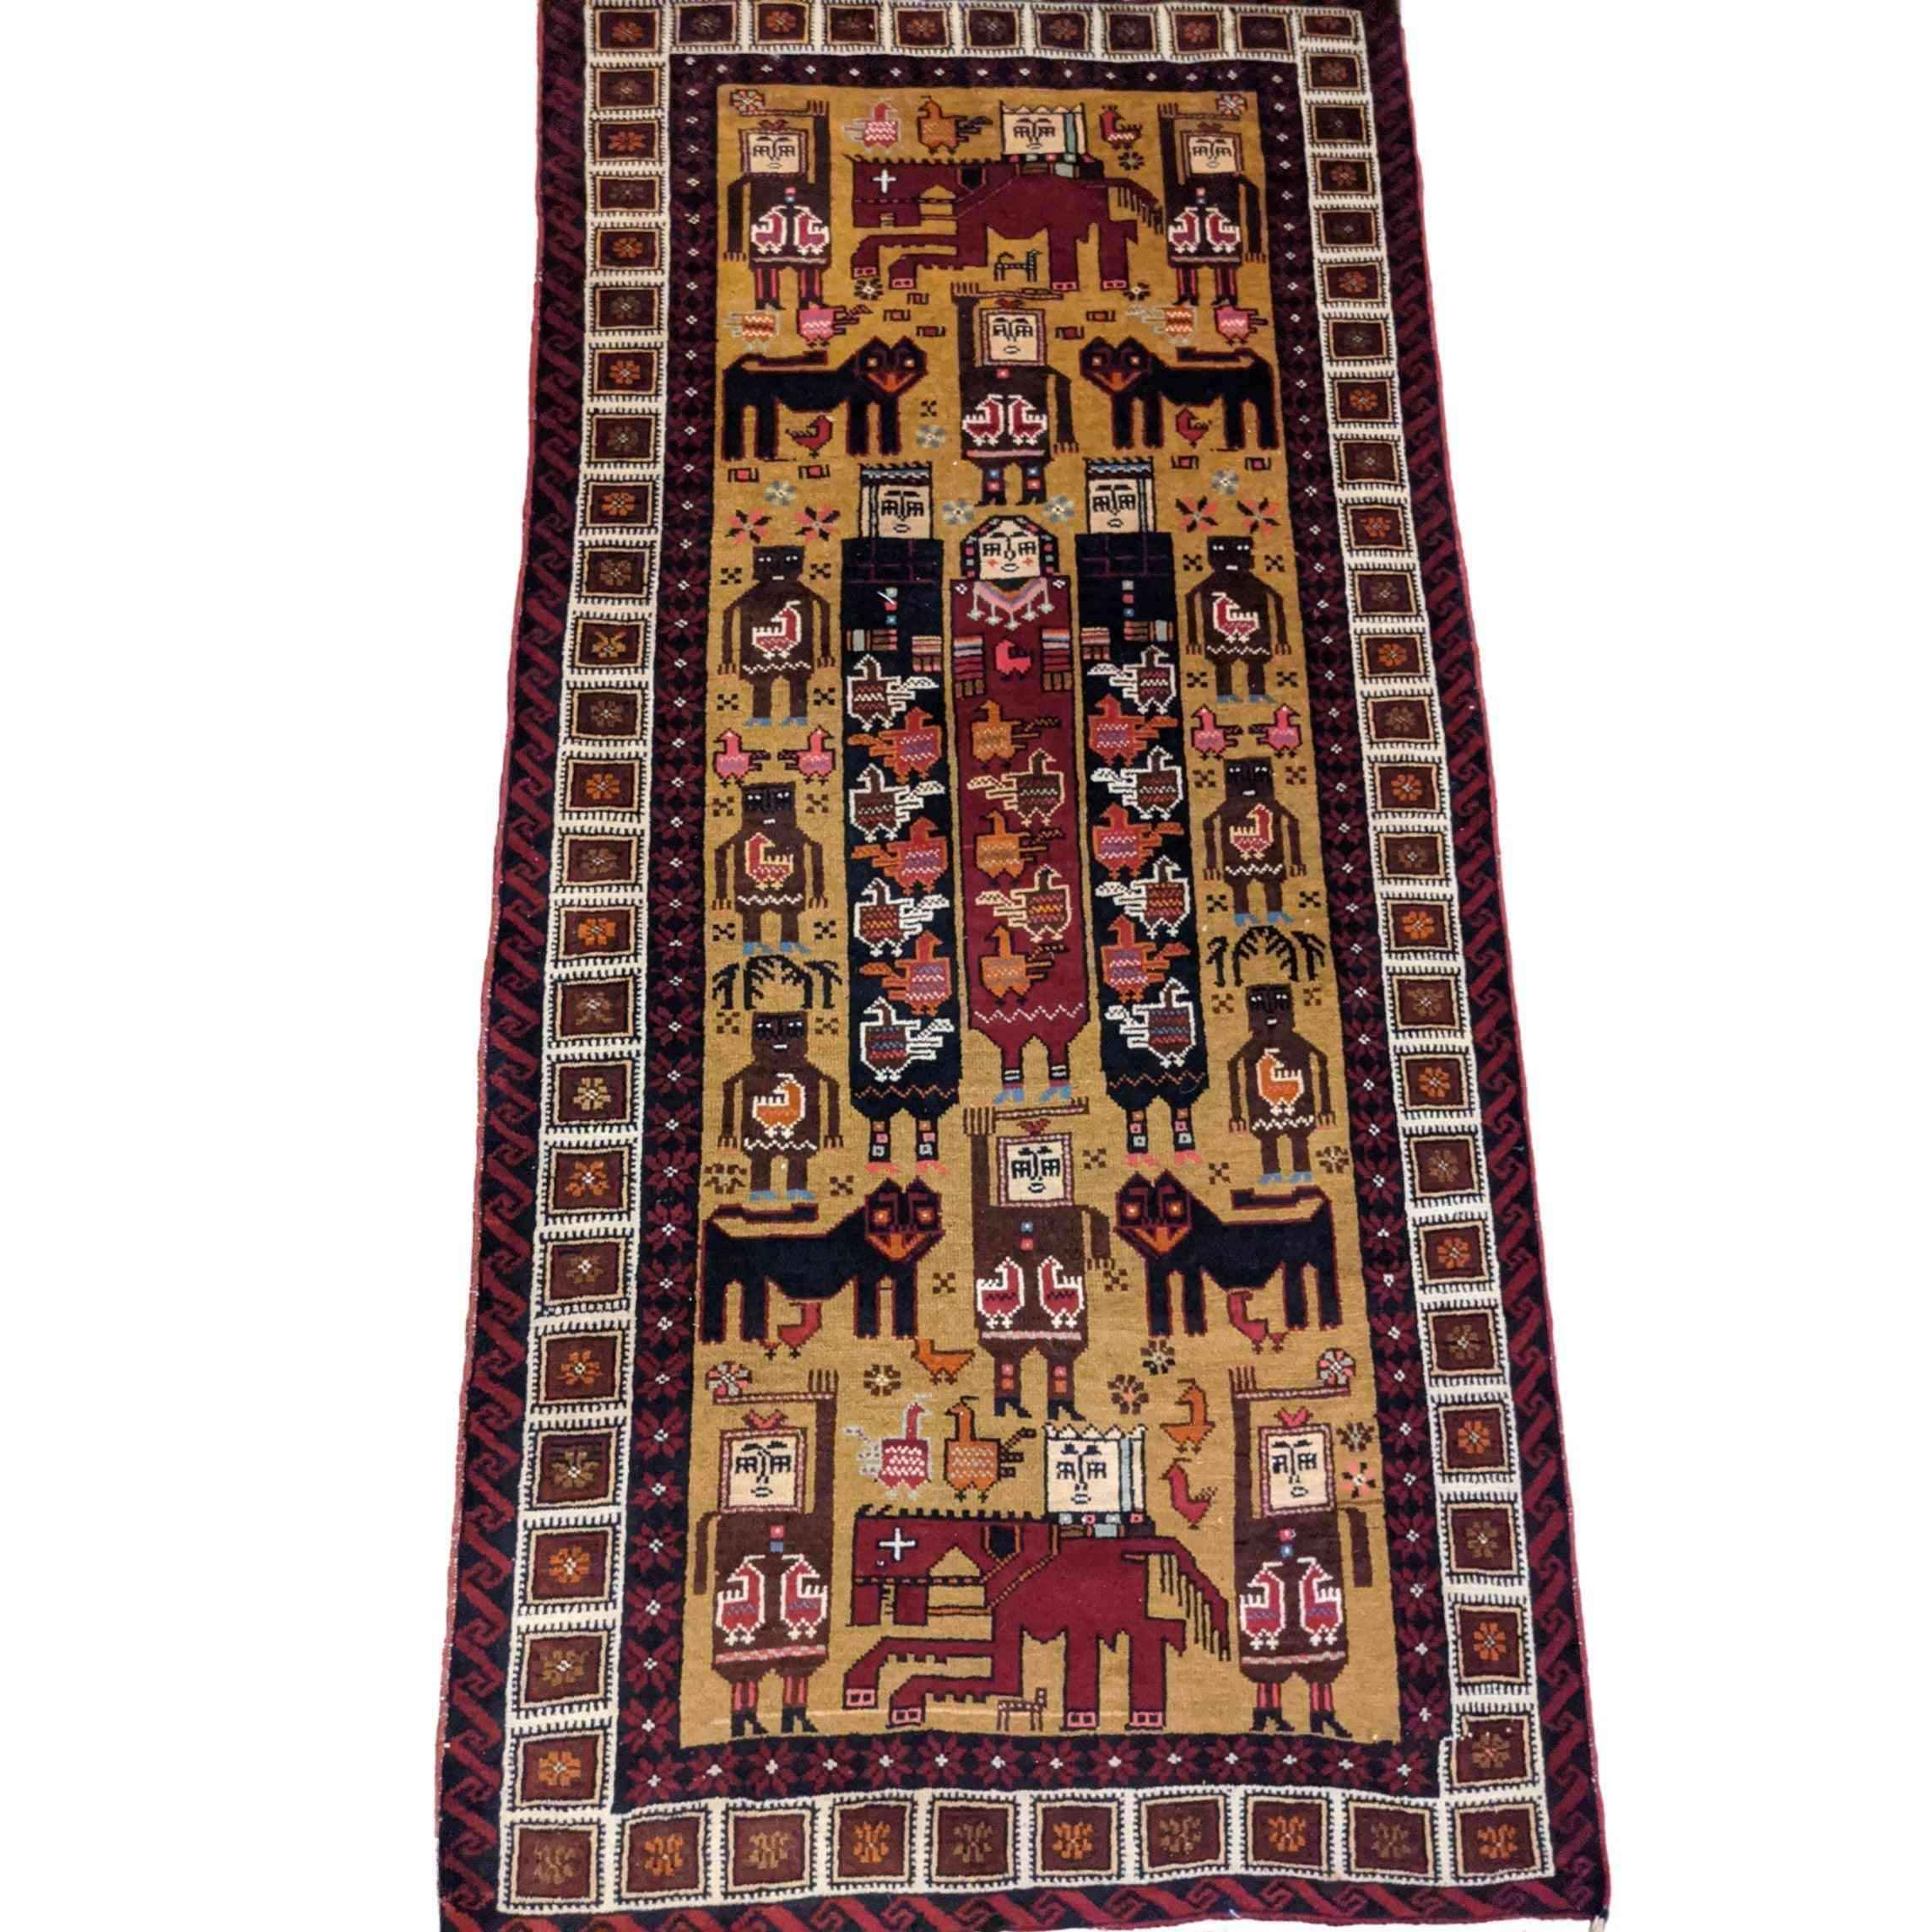 191 x 94 cm Persian Baluch Tribal Yellow Small Rug - Rugmaster